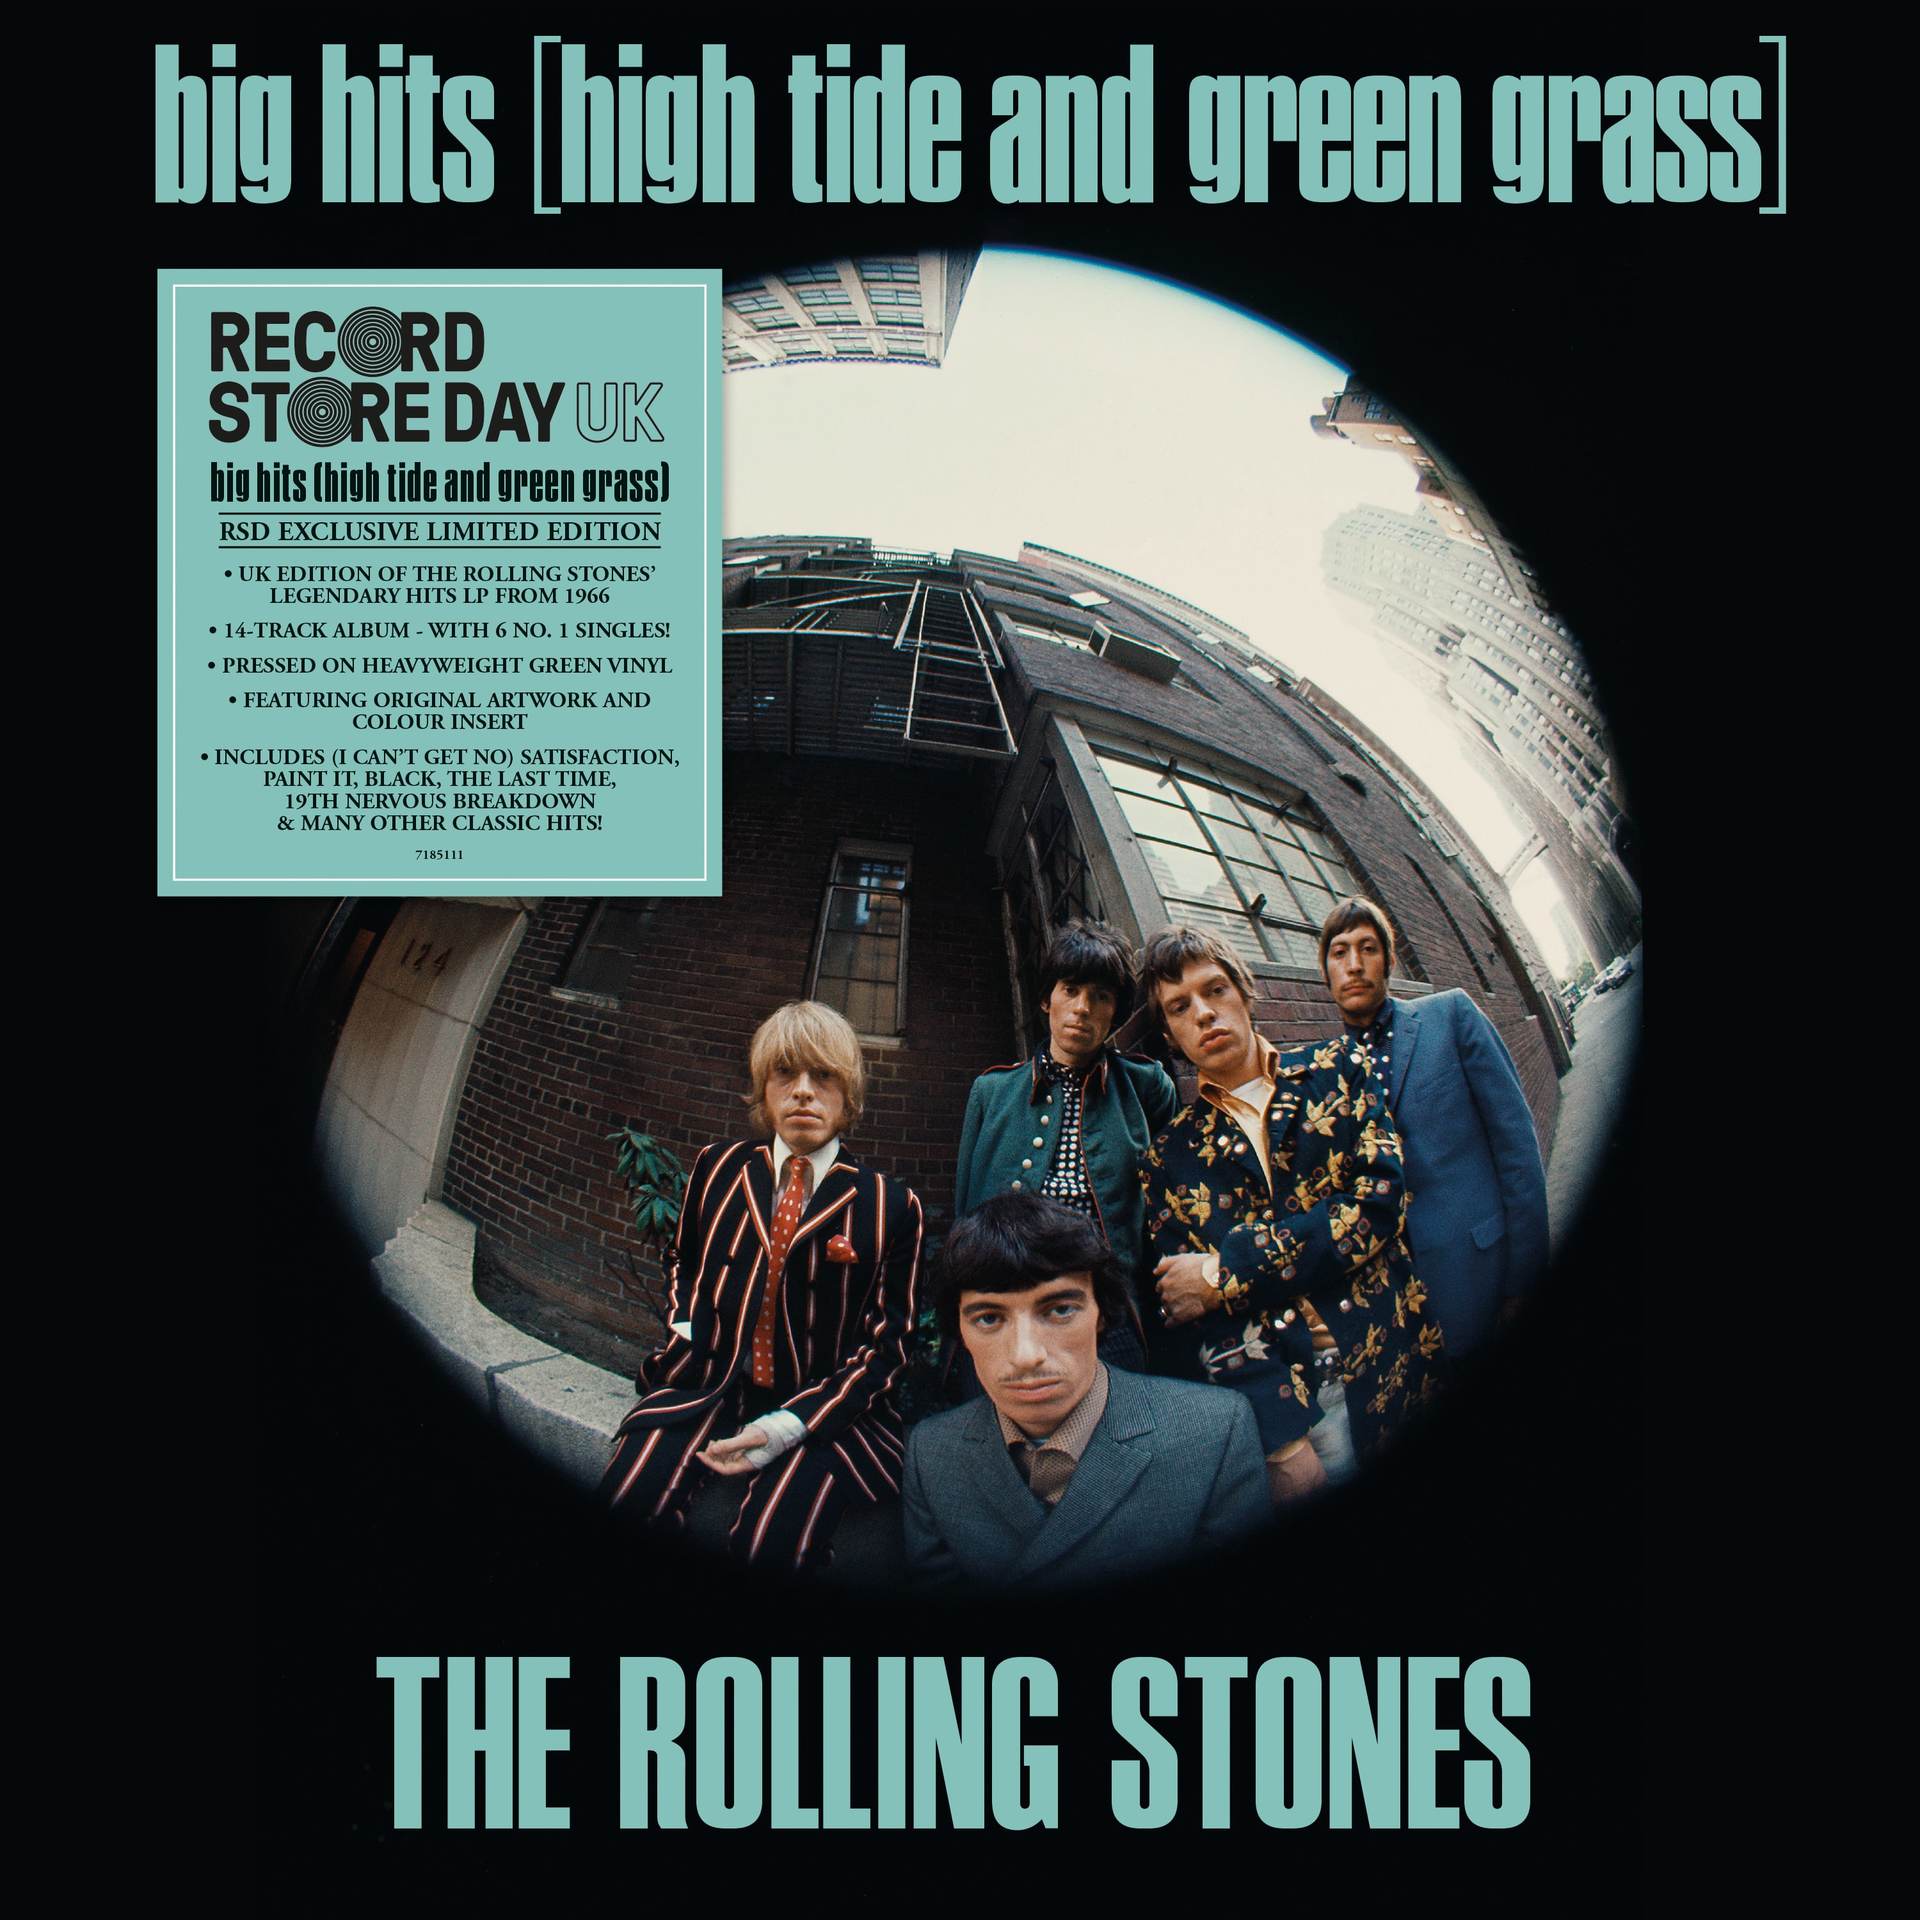 The Rolling Stones - Big Hits (High Tide & Green Grass) - 0018771851110 - UNIVERSAL MUSIC